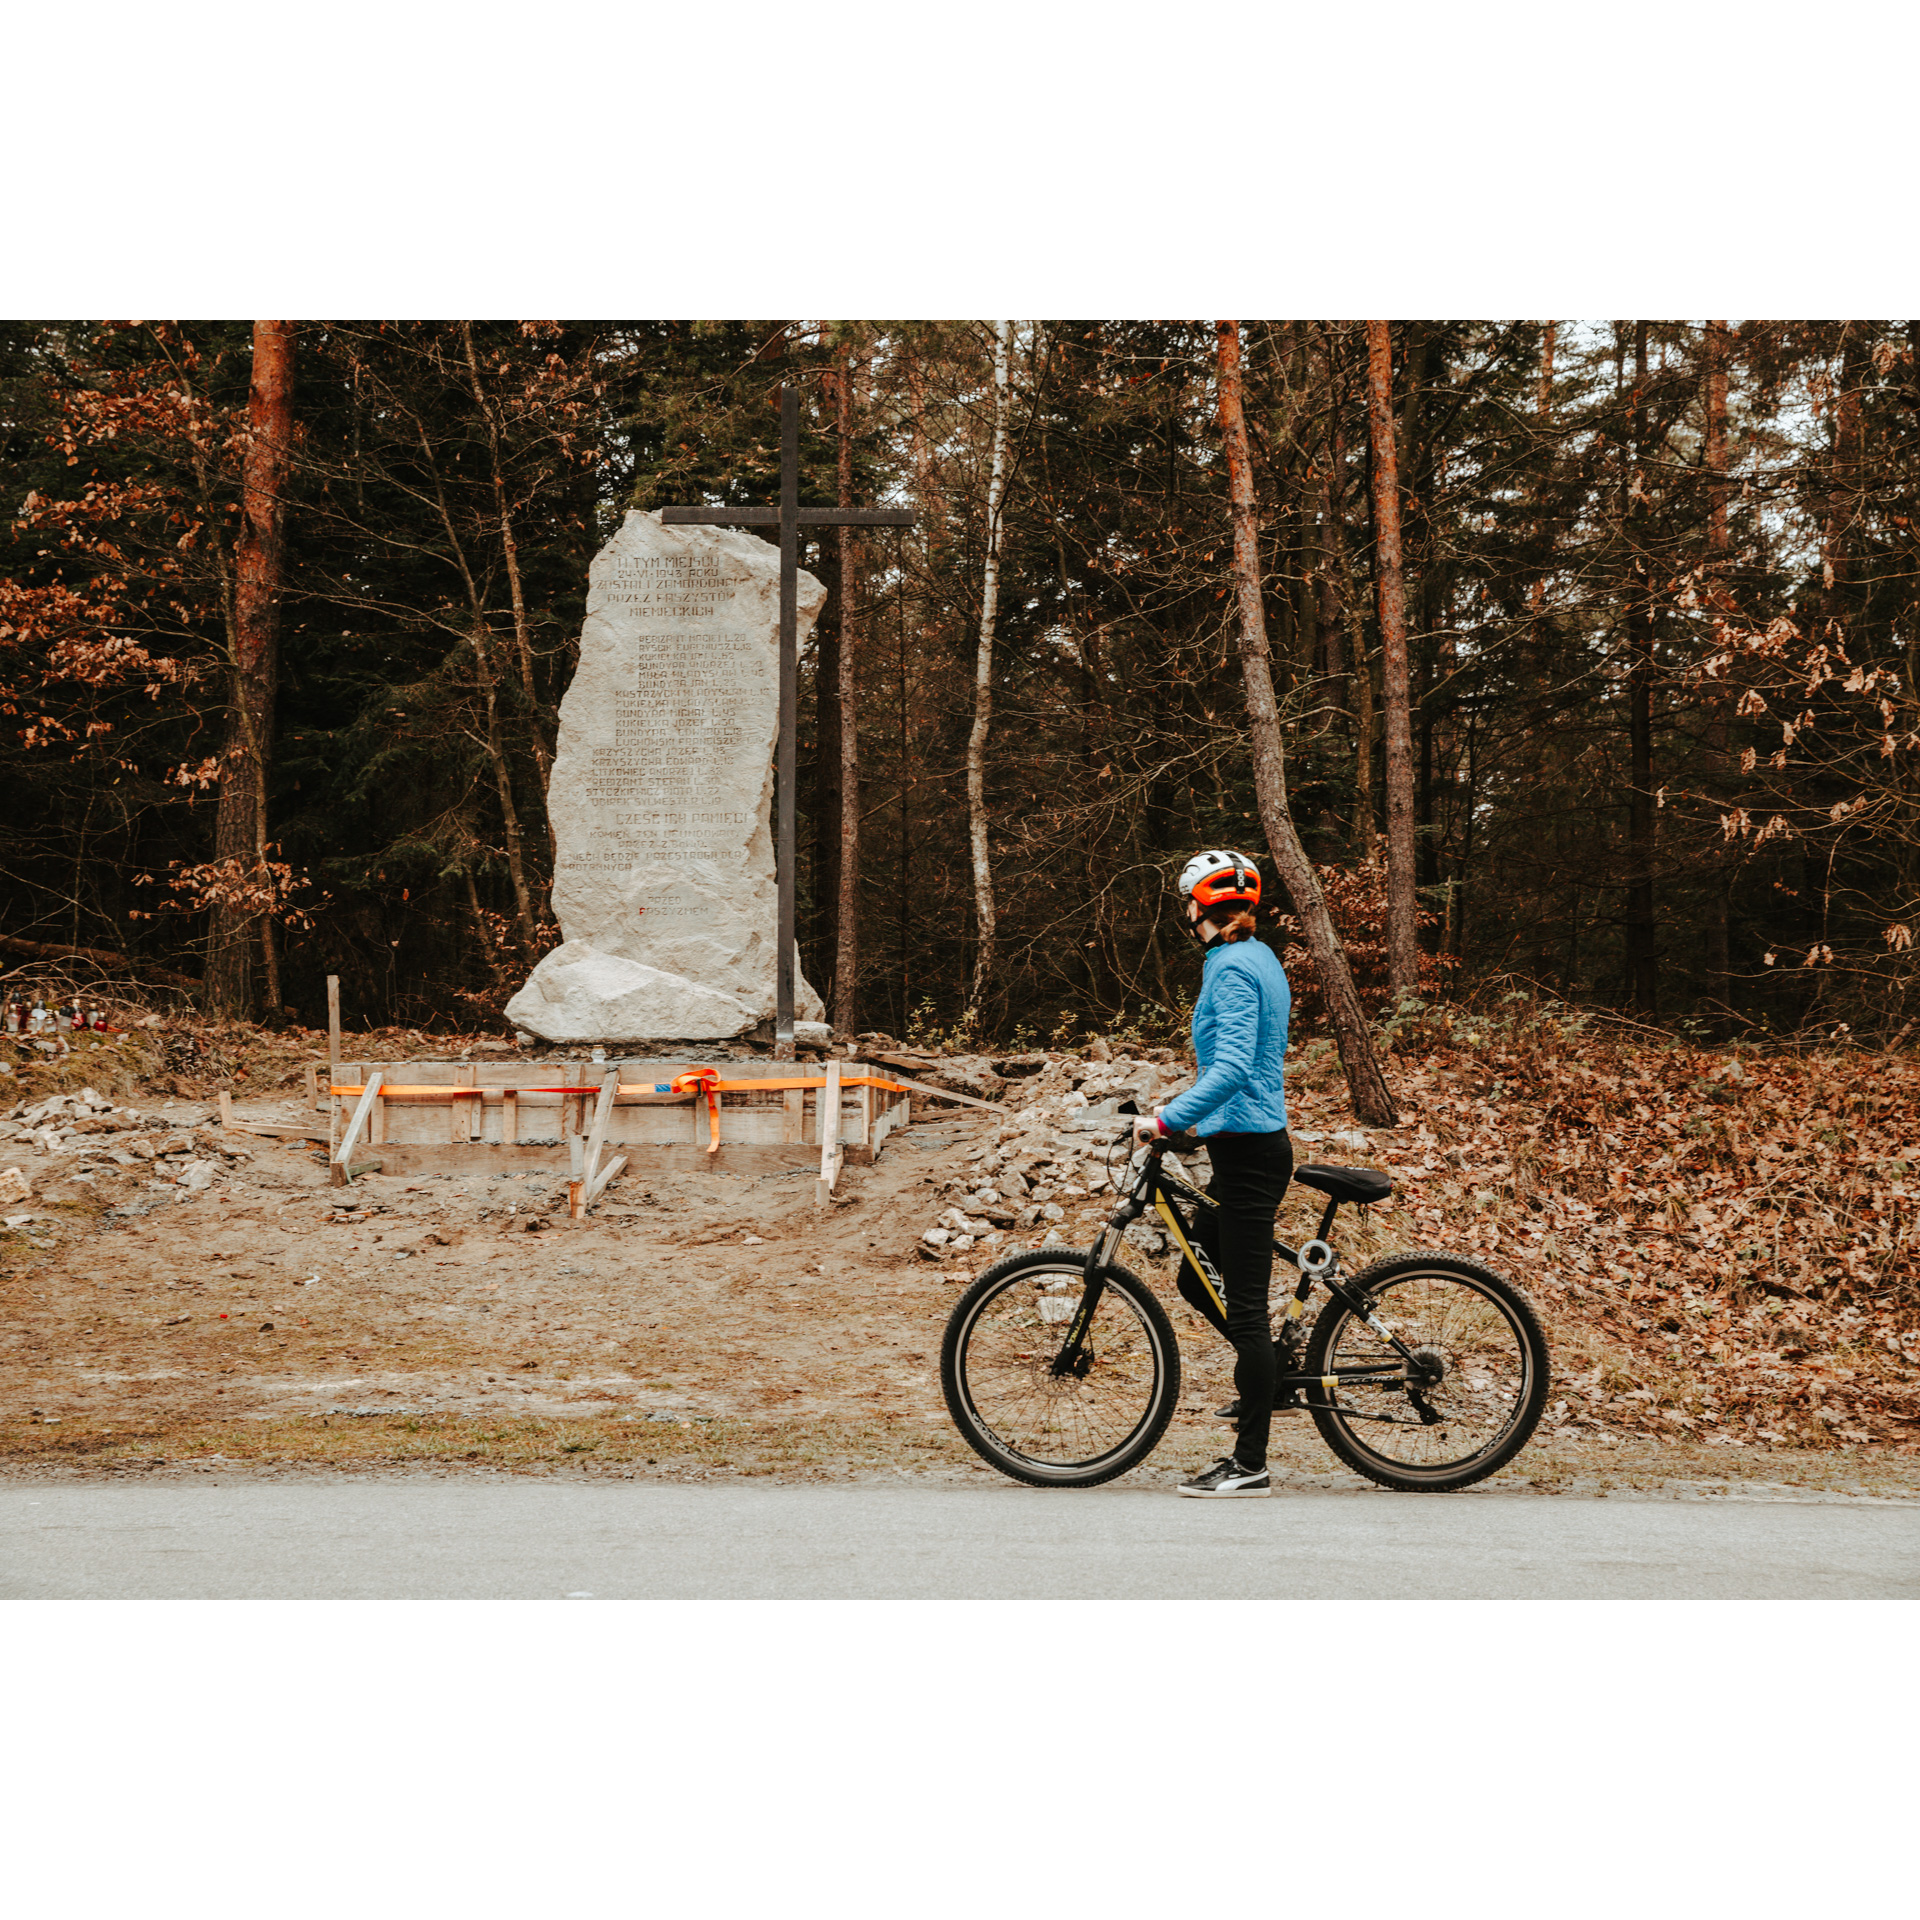 A cyclist in a blue jacket and a white helmet holding a bicycle and looking at a memorial stone standing by forest trees